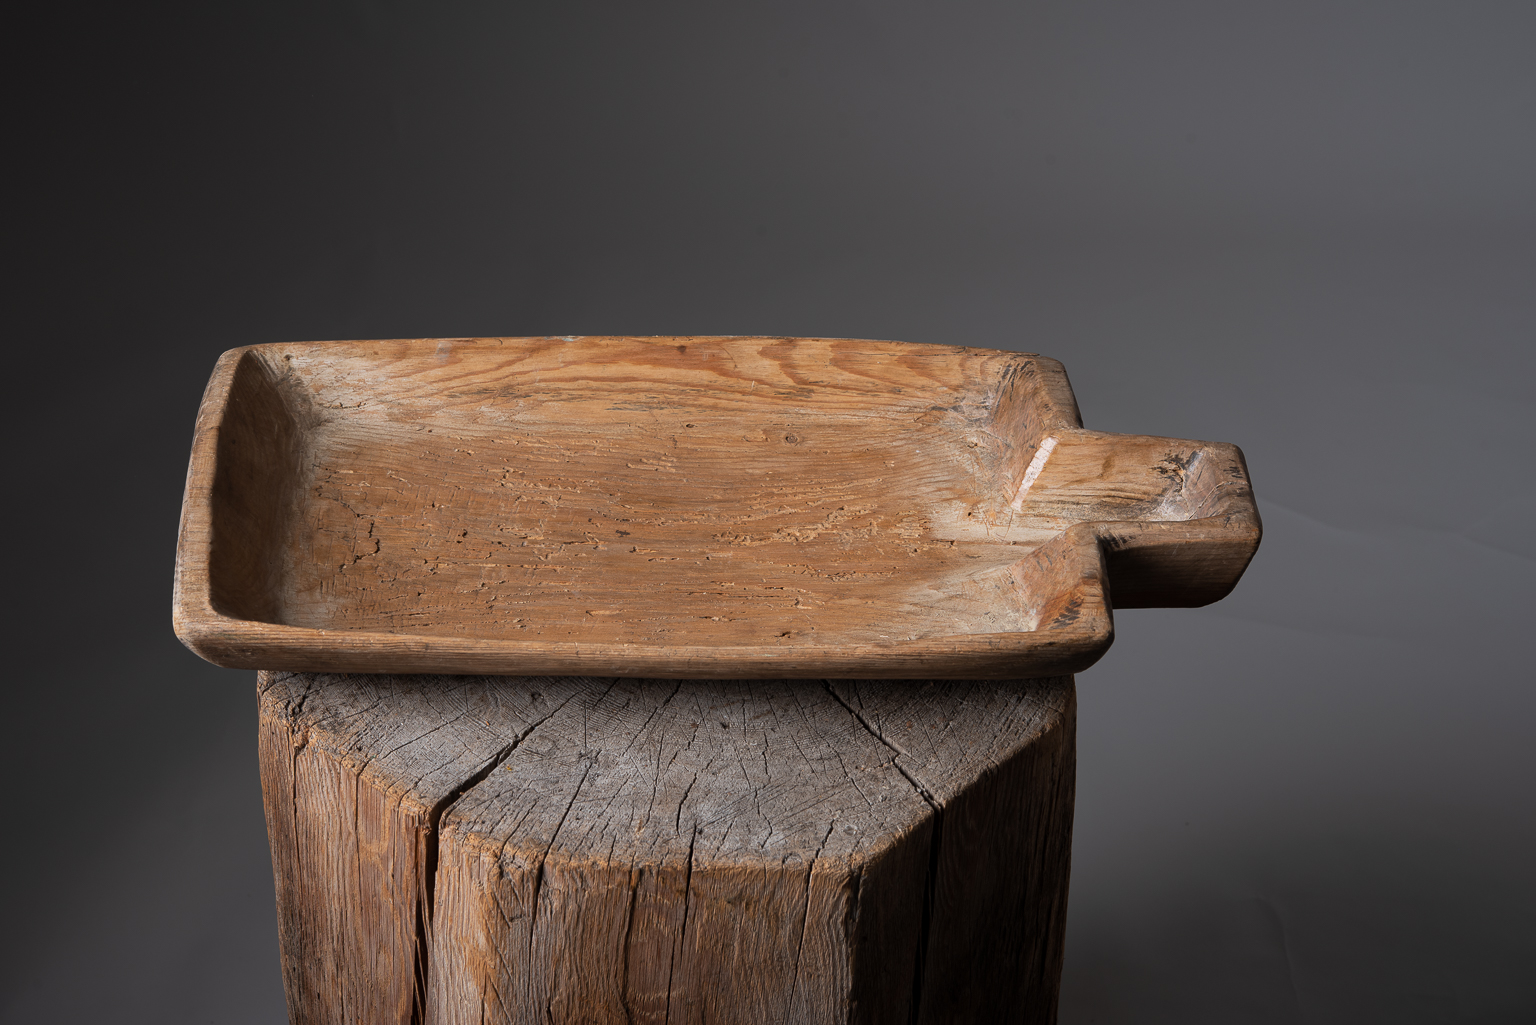 Antique wood cheese trough from northern Sweden. The trough is from the mid 1800s and is completely hand-made. Typically a household item